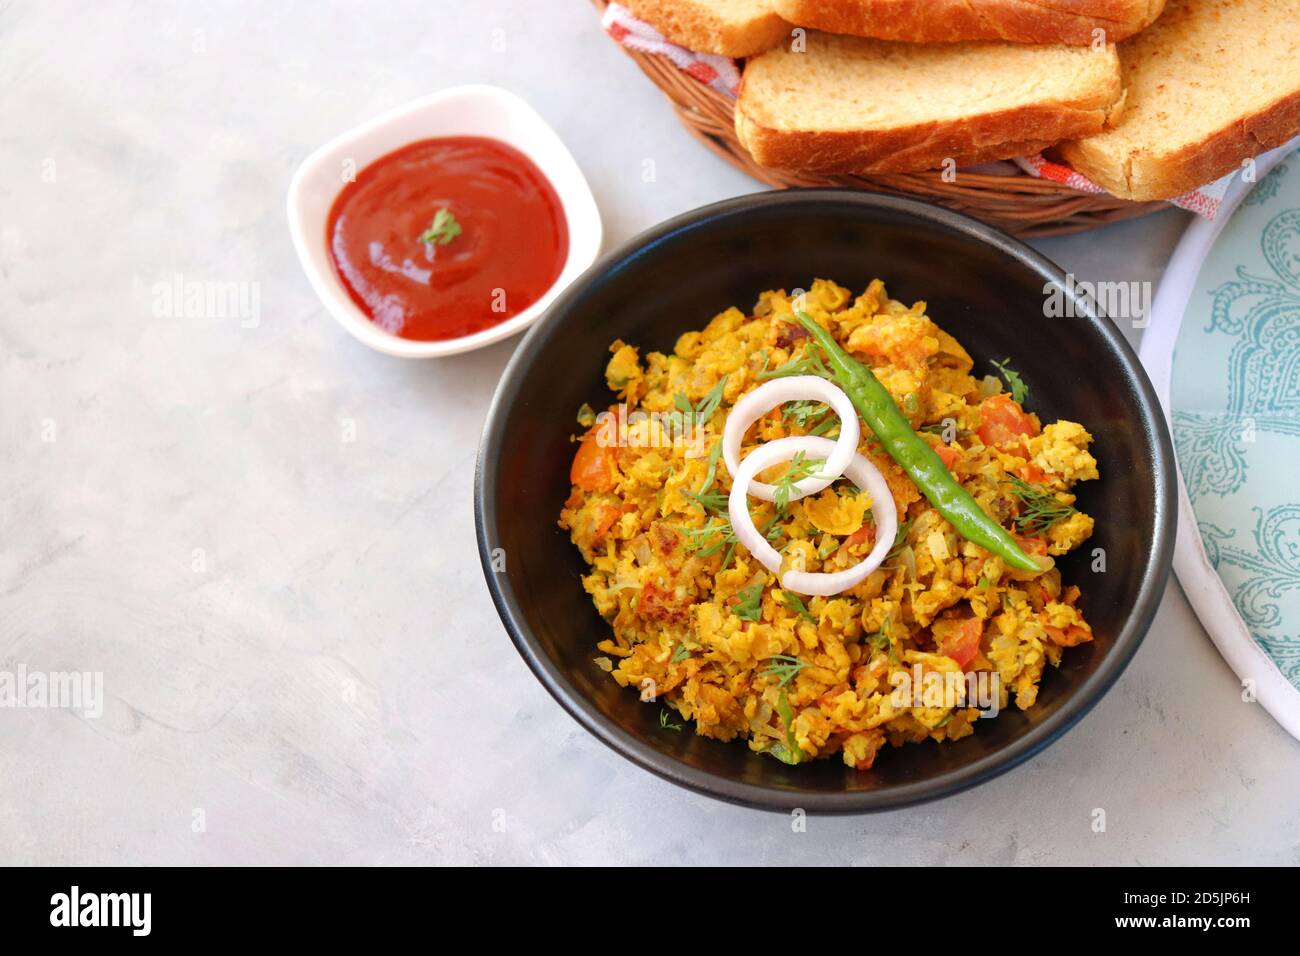 Indian Breakfast Dish - Parsi Akuri or Anda Bhurji or Indian spicy scrambled eggs served with toasted brown bread & ketchup. Famous Indian street food Stock Photo